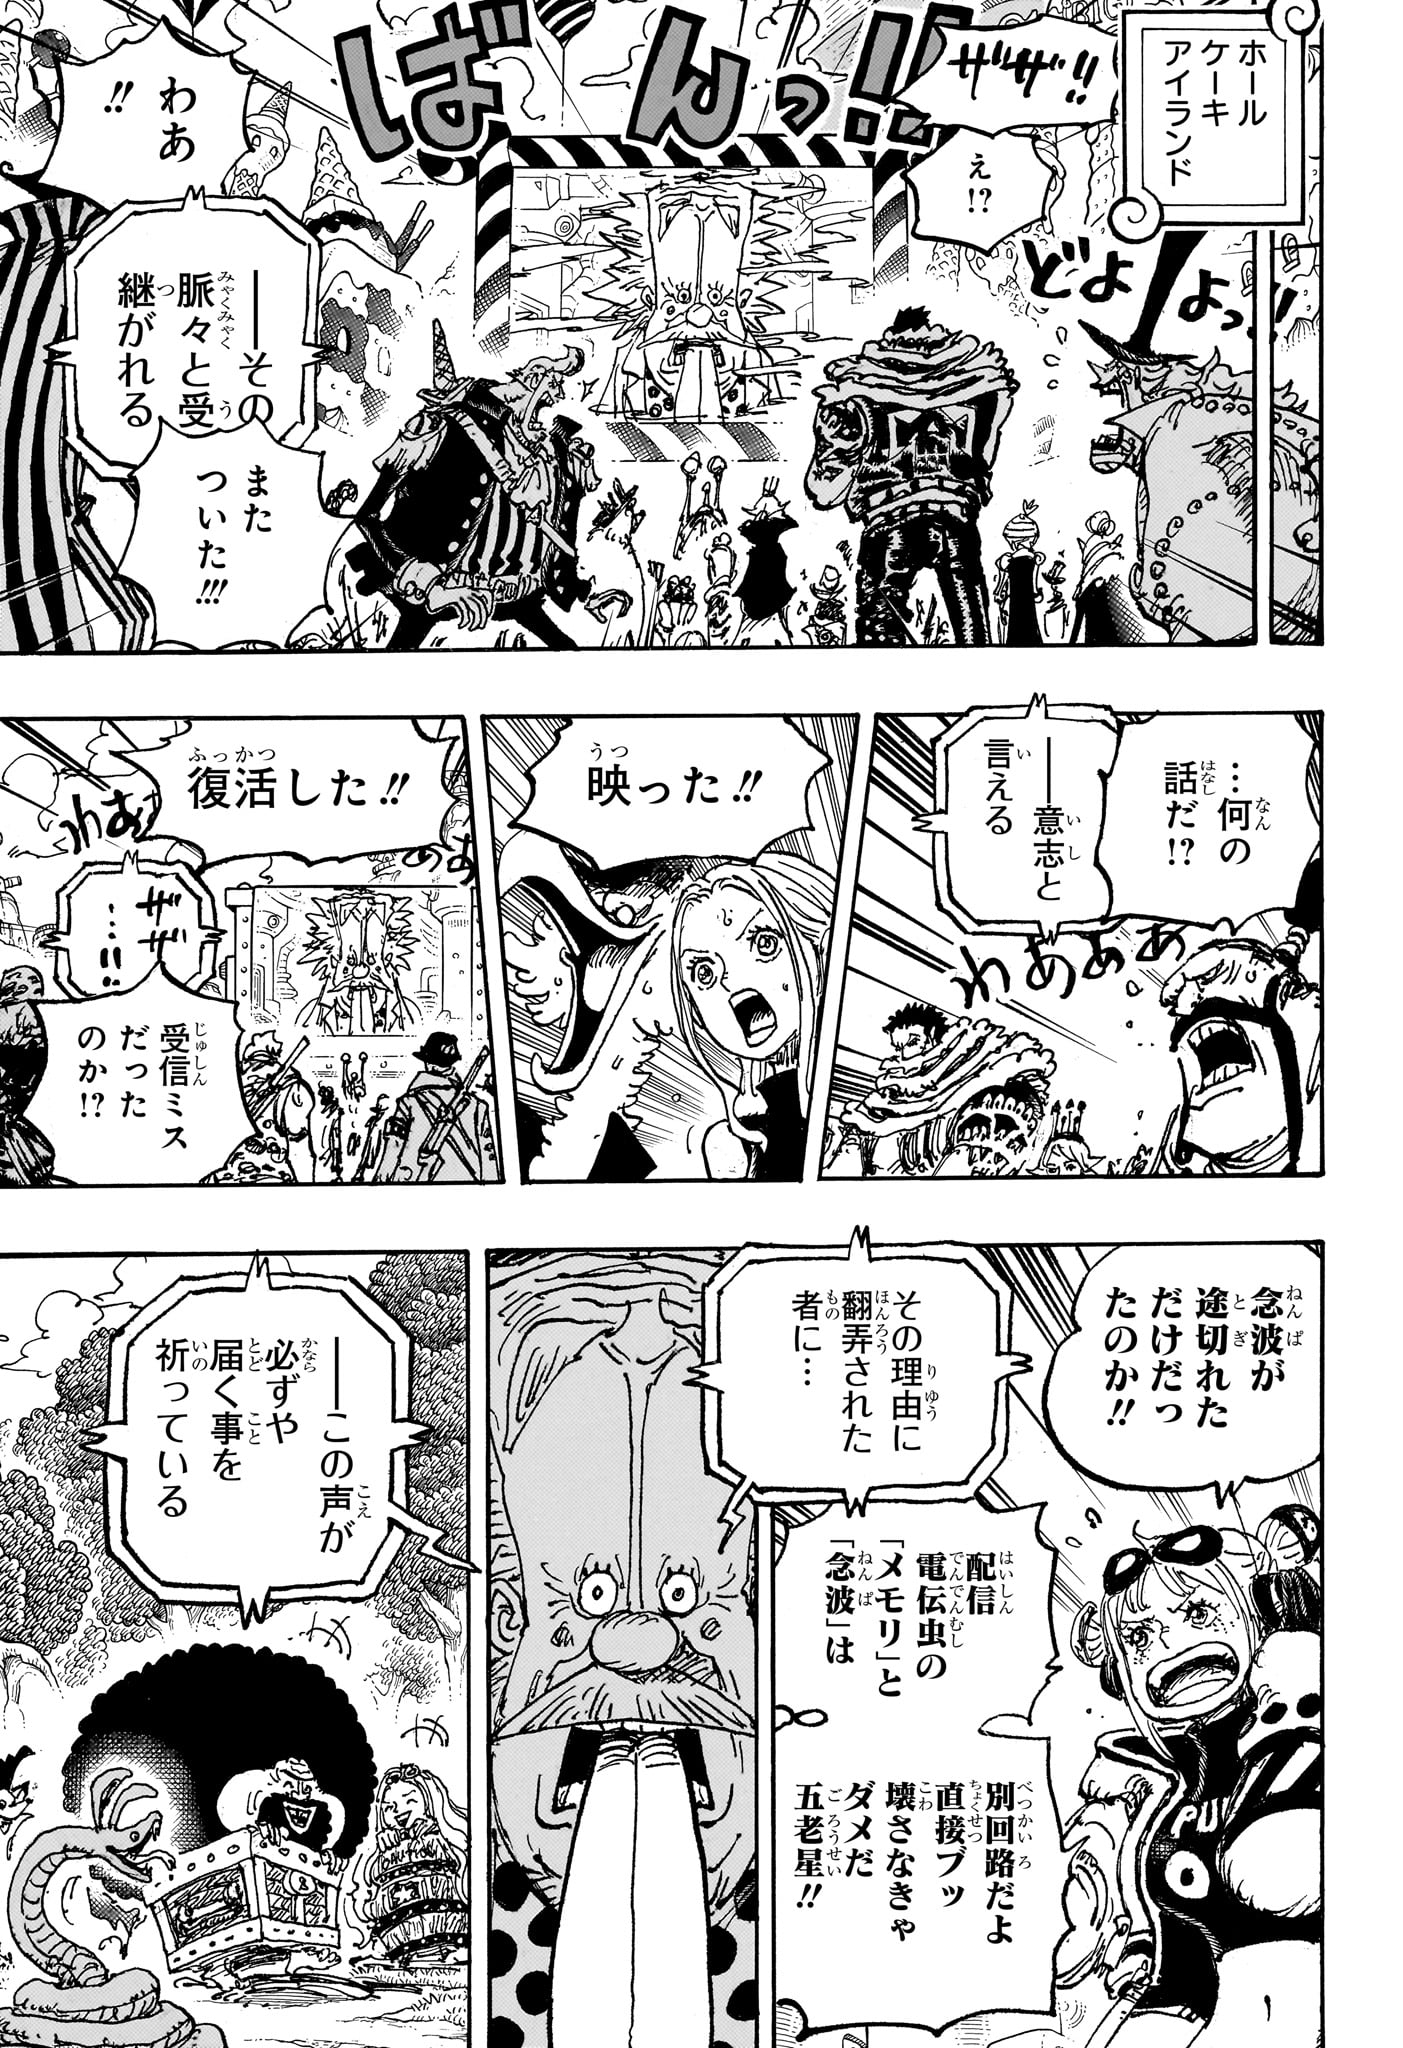 One Piece - Chapter 1119 - Page 9